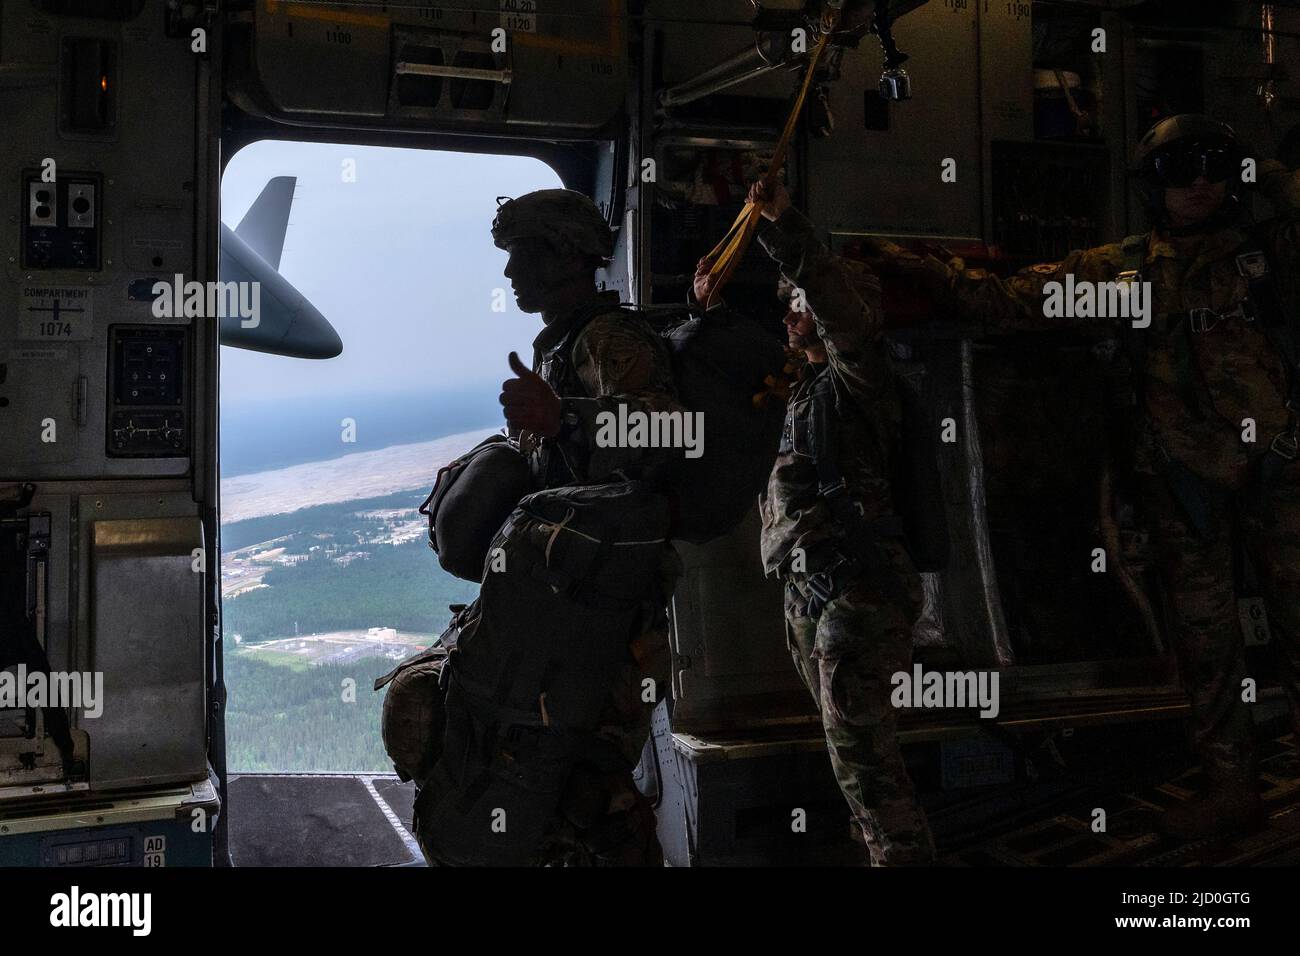 U.S. Army Sgt. 1st Class Charlie Arrendale, gives a thumbs-up signal prior to the paratroopers jumping out of a C-17 Globemaster III from the 176th Airlift Squadron, Joint Base Elmendorf-Richardson, Alaska over Allen Army Airfield, Fort Greely, June 15, 2022. RF-A provides realistic combat training by integrating joint, coalition and multilateral forces into simulated forward operating bases. The paratroopers and Arrendale are assigned to the 2nd Infantry Brigade Combat Team (Airborne), 11th Airborne Division. (U.S. Air Force photo by Sheila deVera) Stock Photo